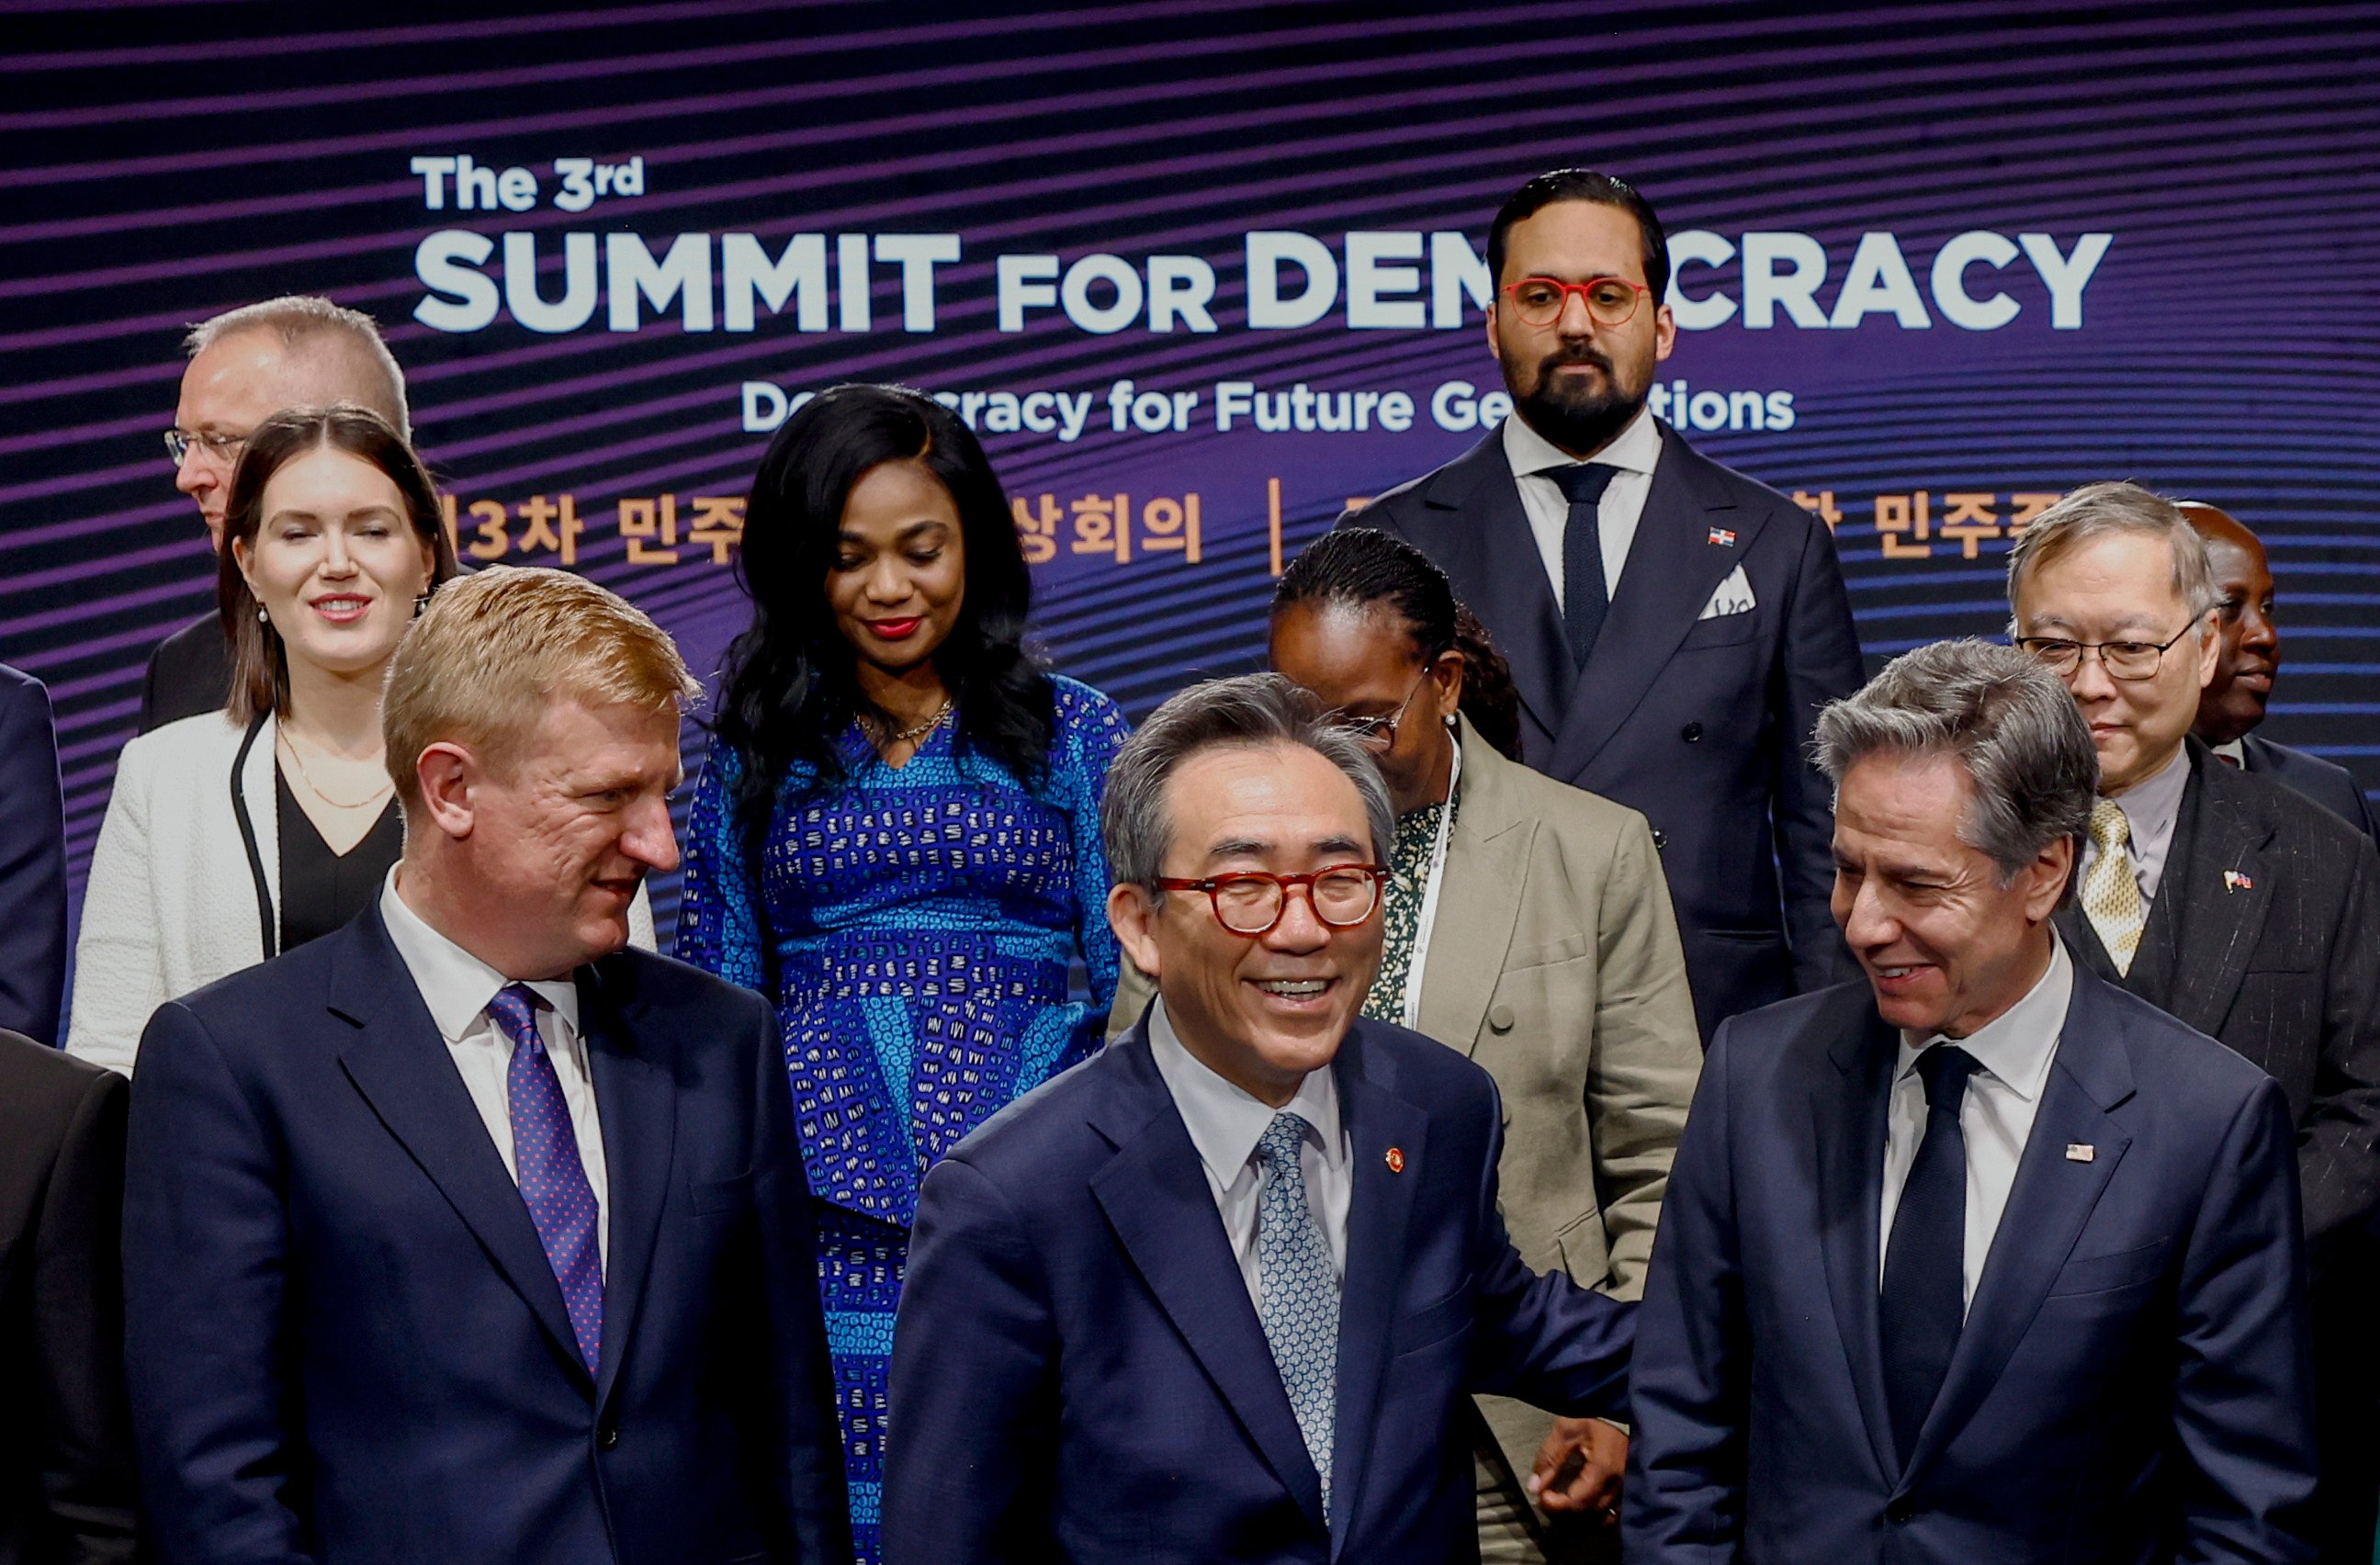 US Secretary of State Antony Blinken (bottom right) interacts with South Korean Foreign Minister Cho Tae-yul at the Summit for Democracy on Monday in Seoul. Photo via AP